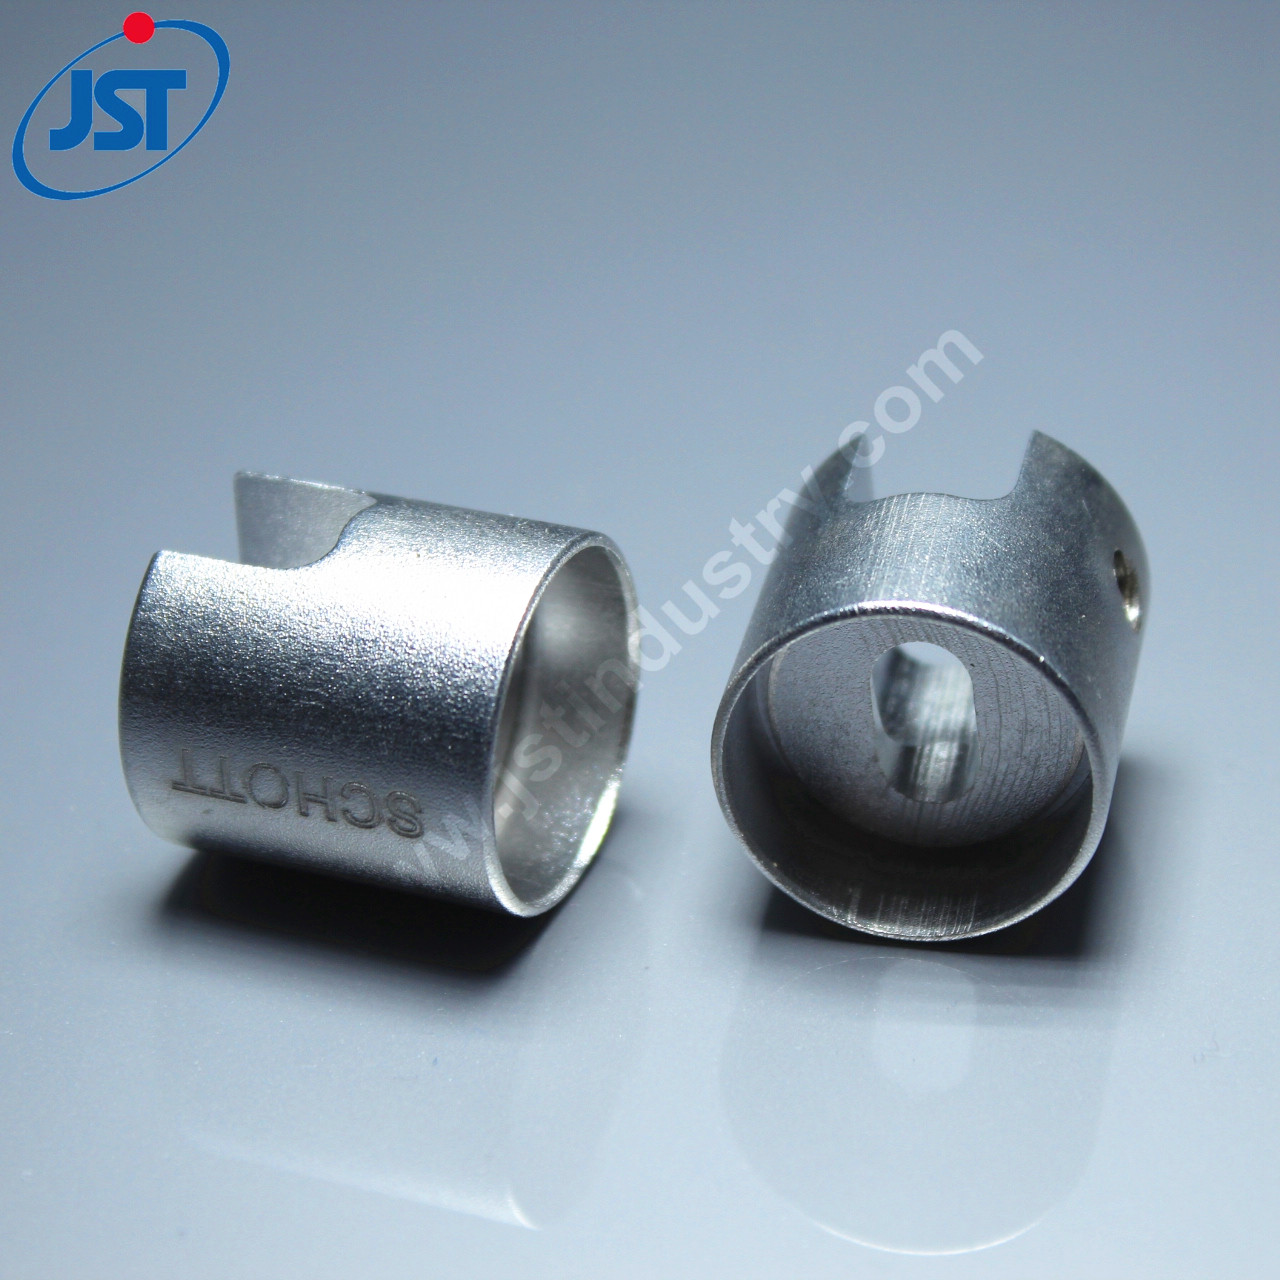 Precision CNC Turning Milling Machining Stainless Steel Parts 